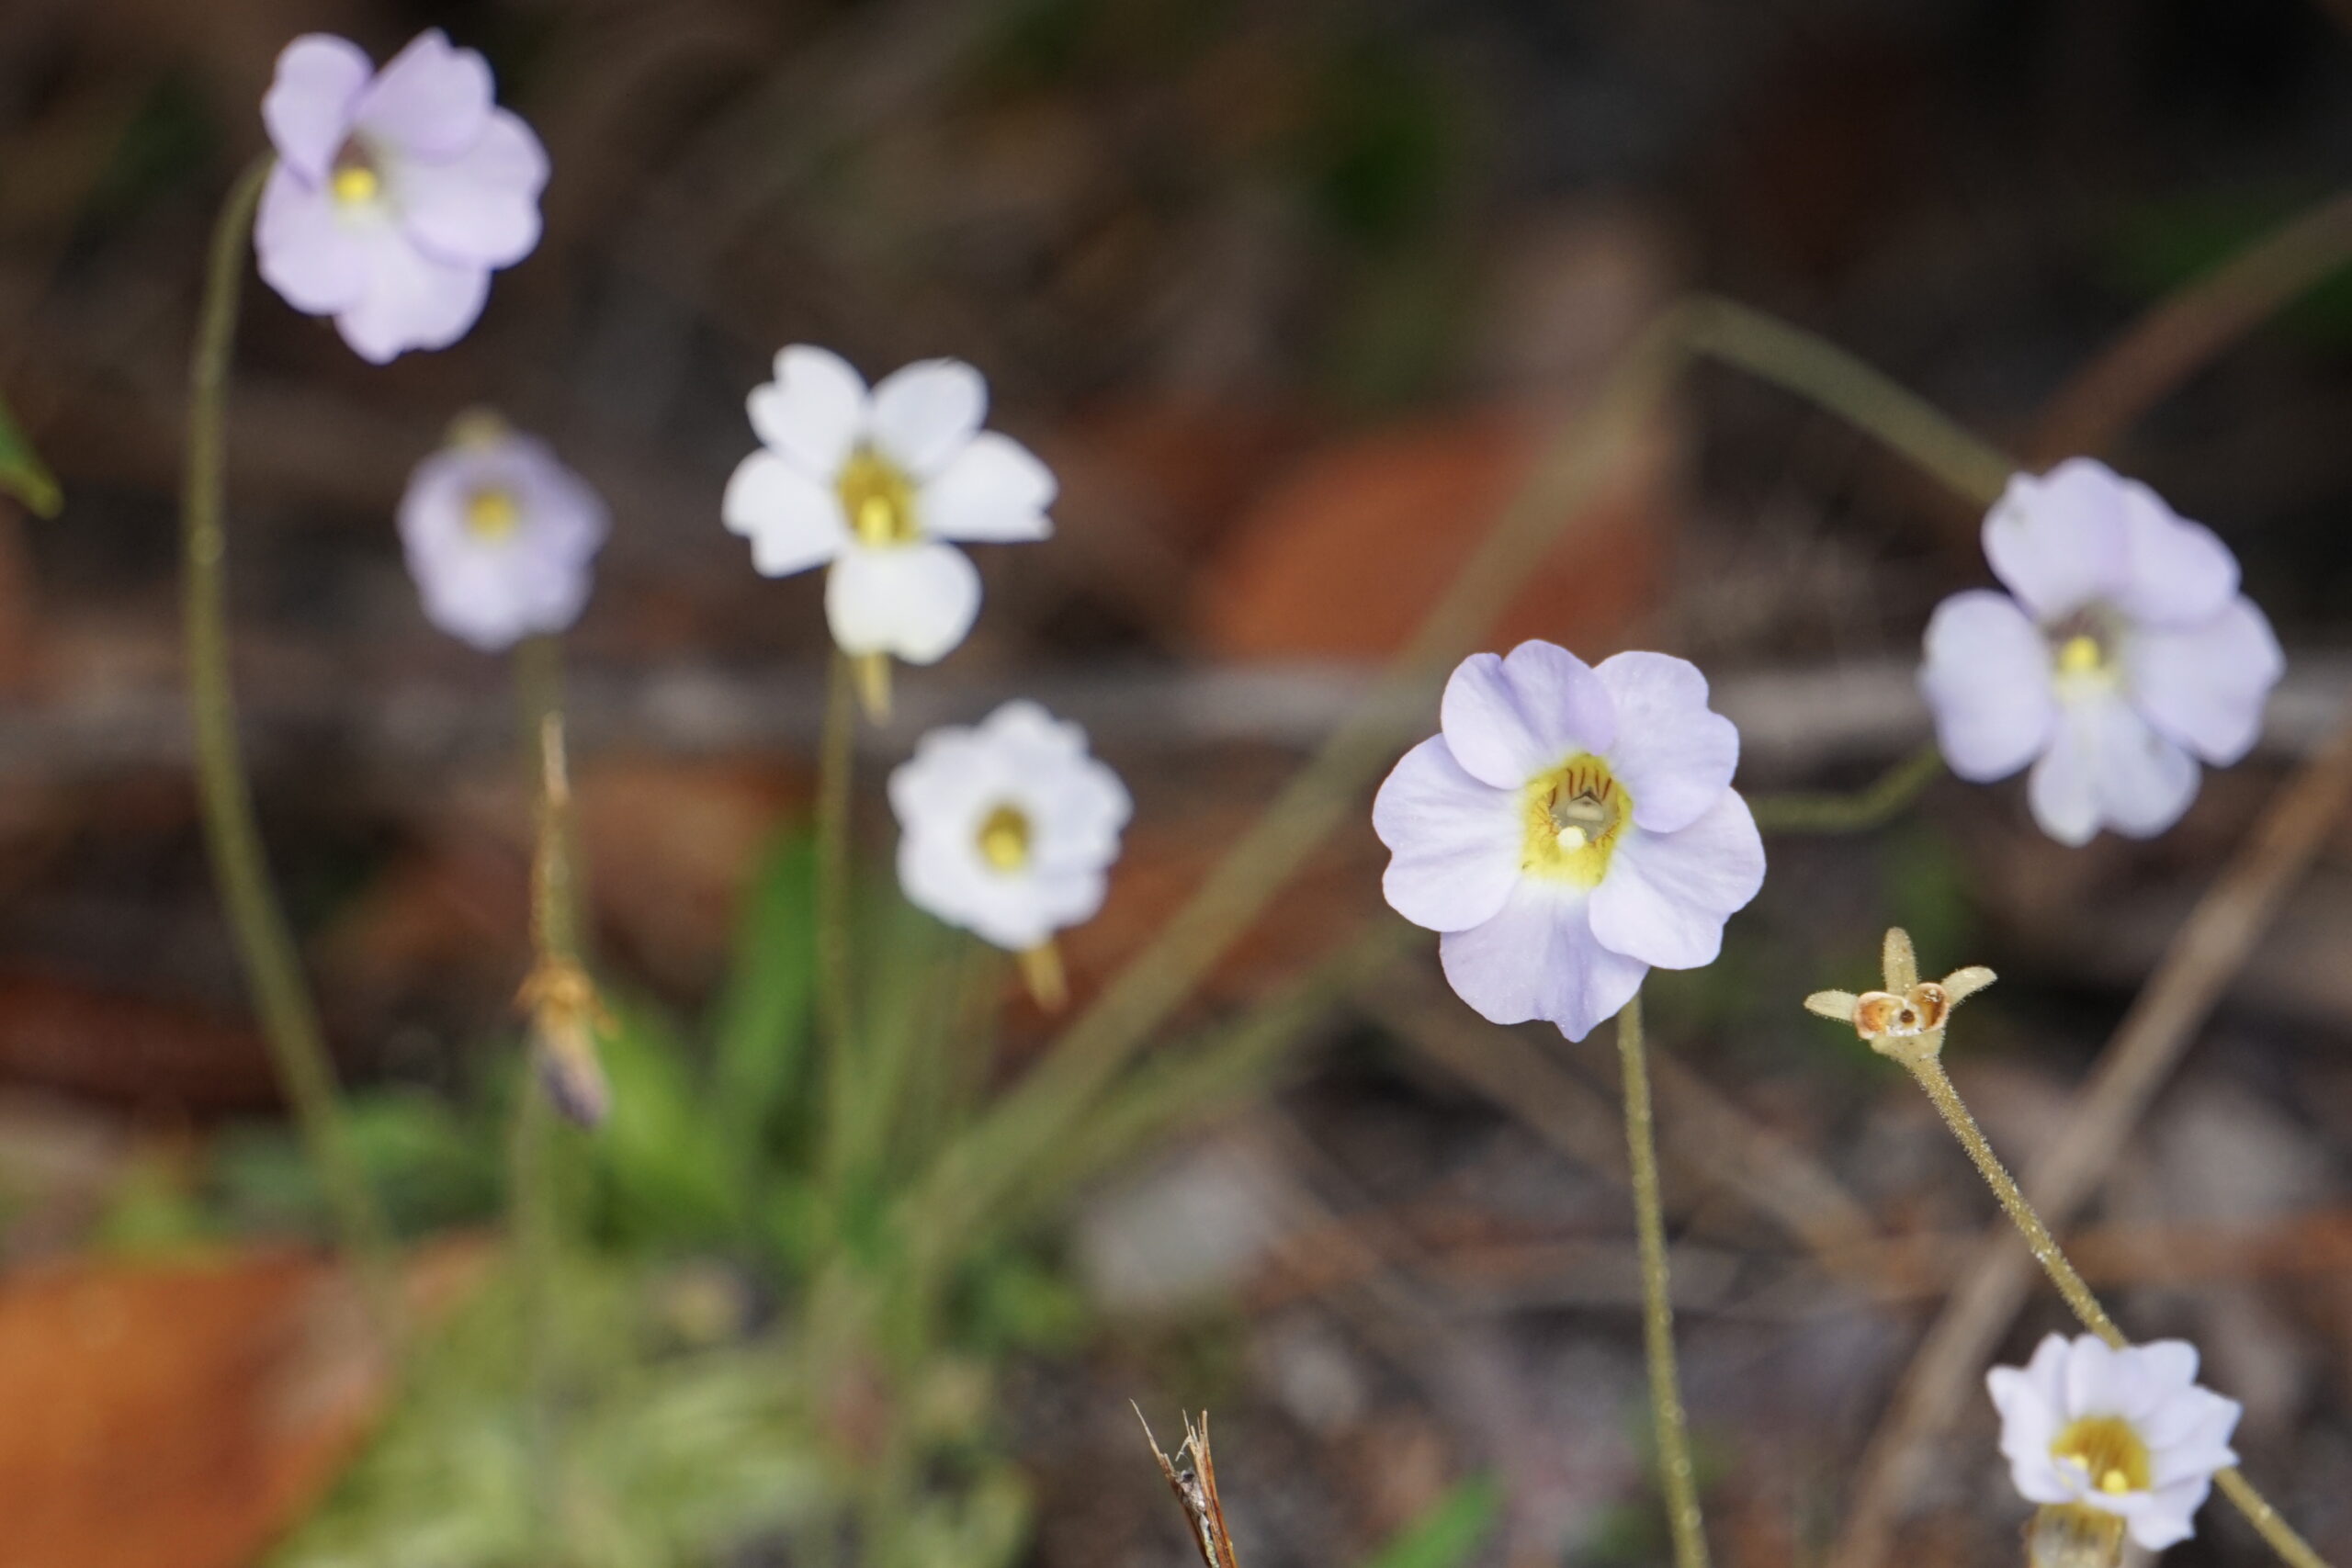 Small butterwort (Pinguicula pumila) by Emily Bell.